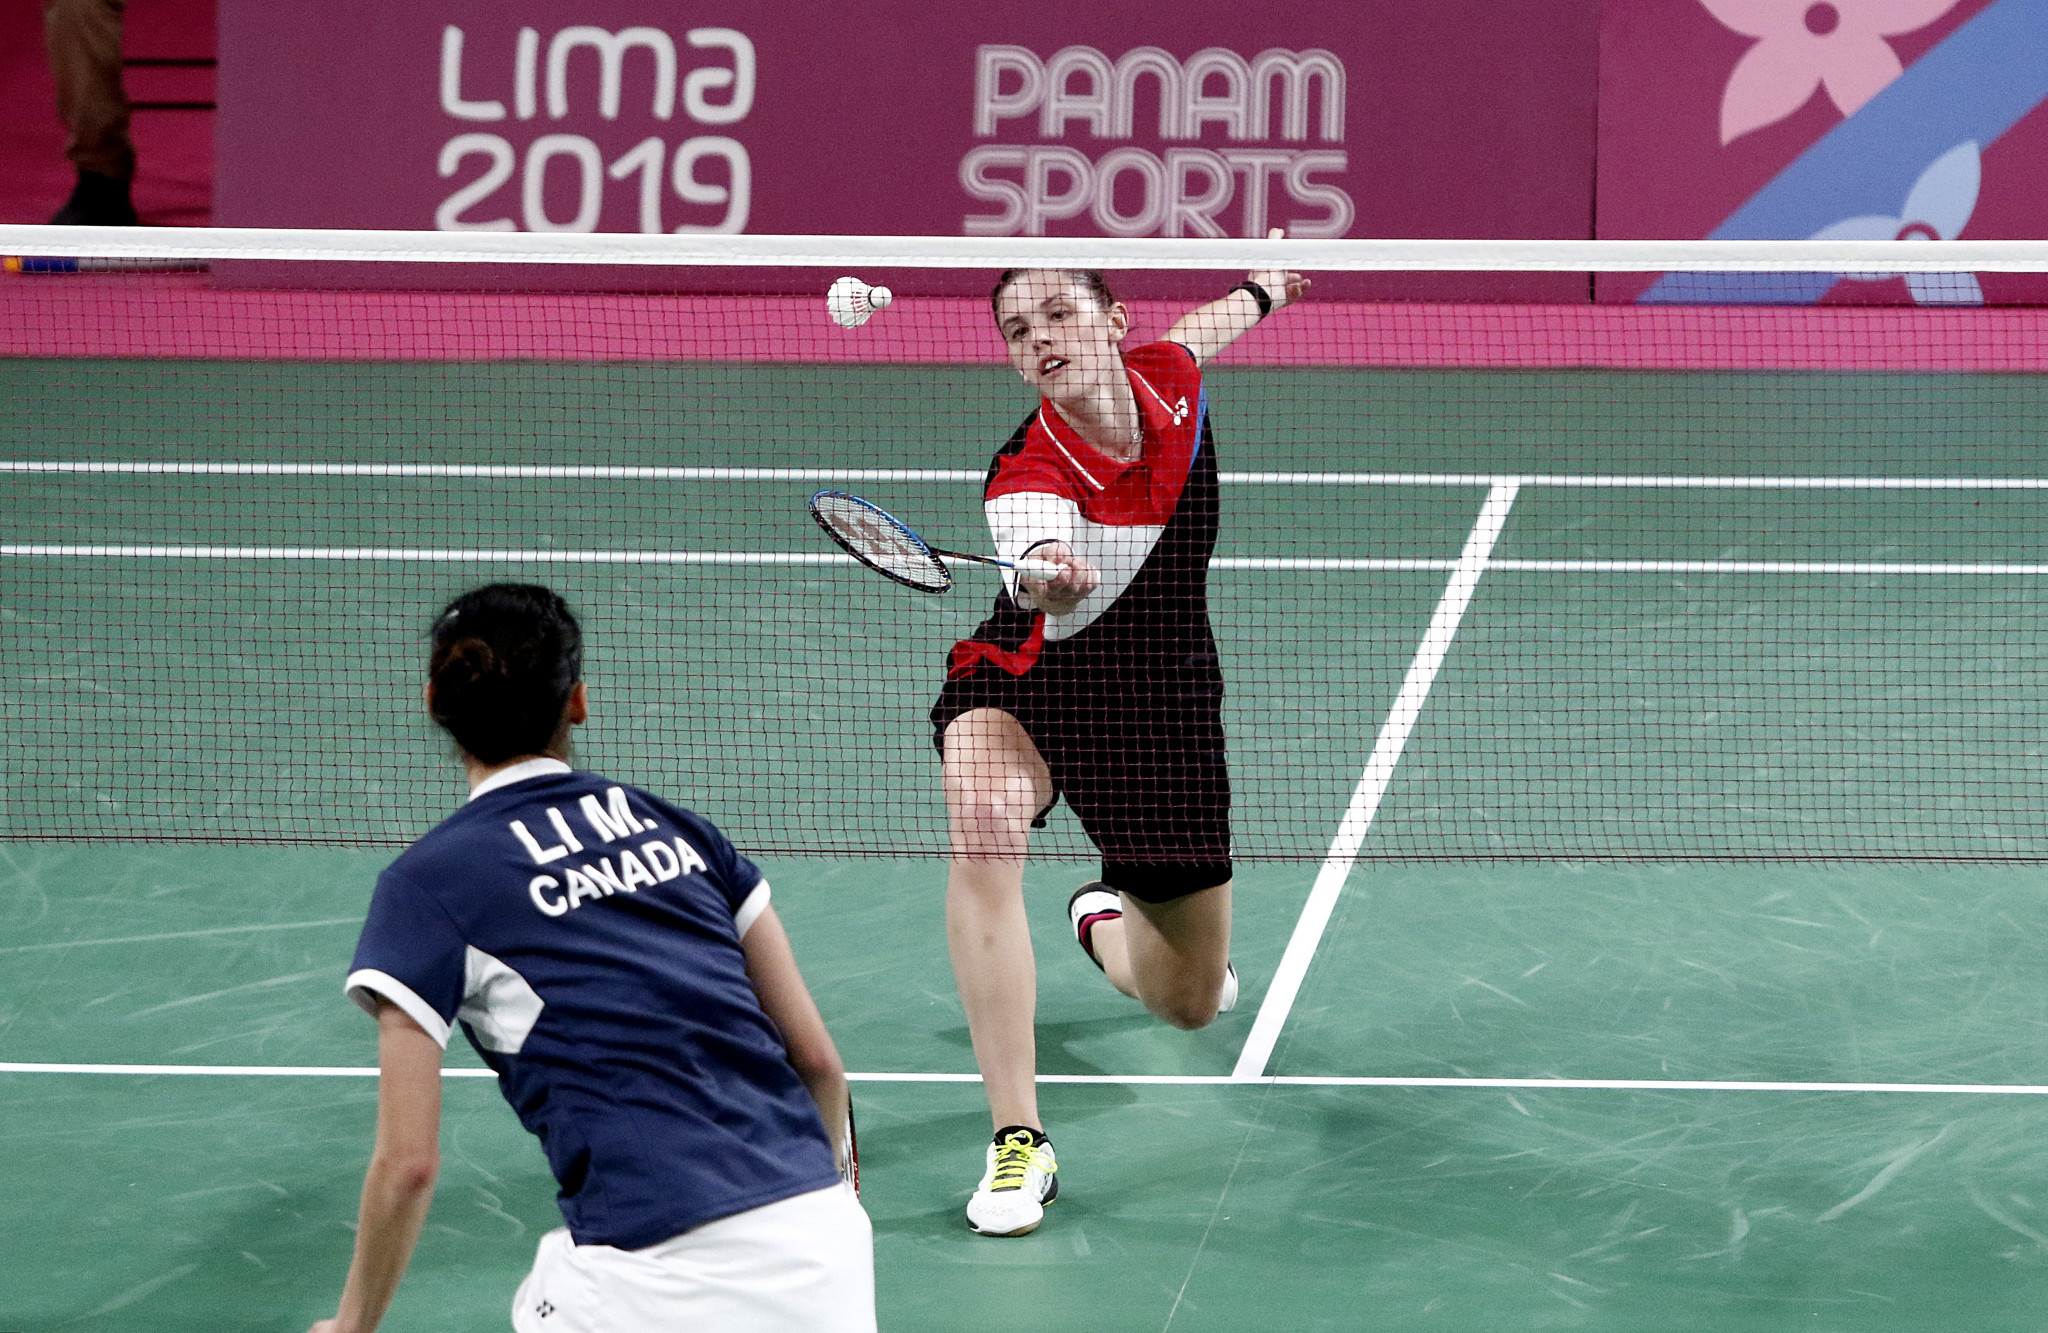 Canada had a successful day in badminton, claiming four gold medals out of a possible five ©Lima 2019